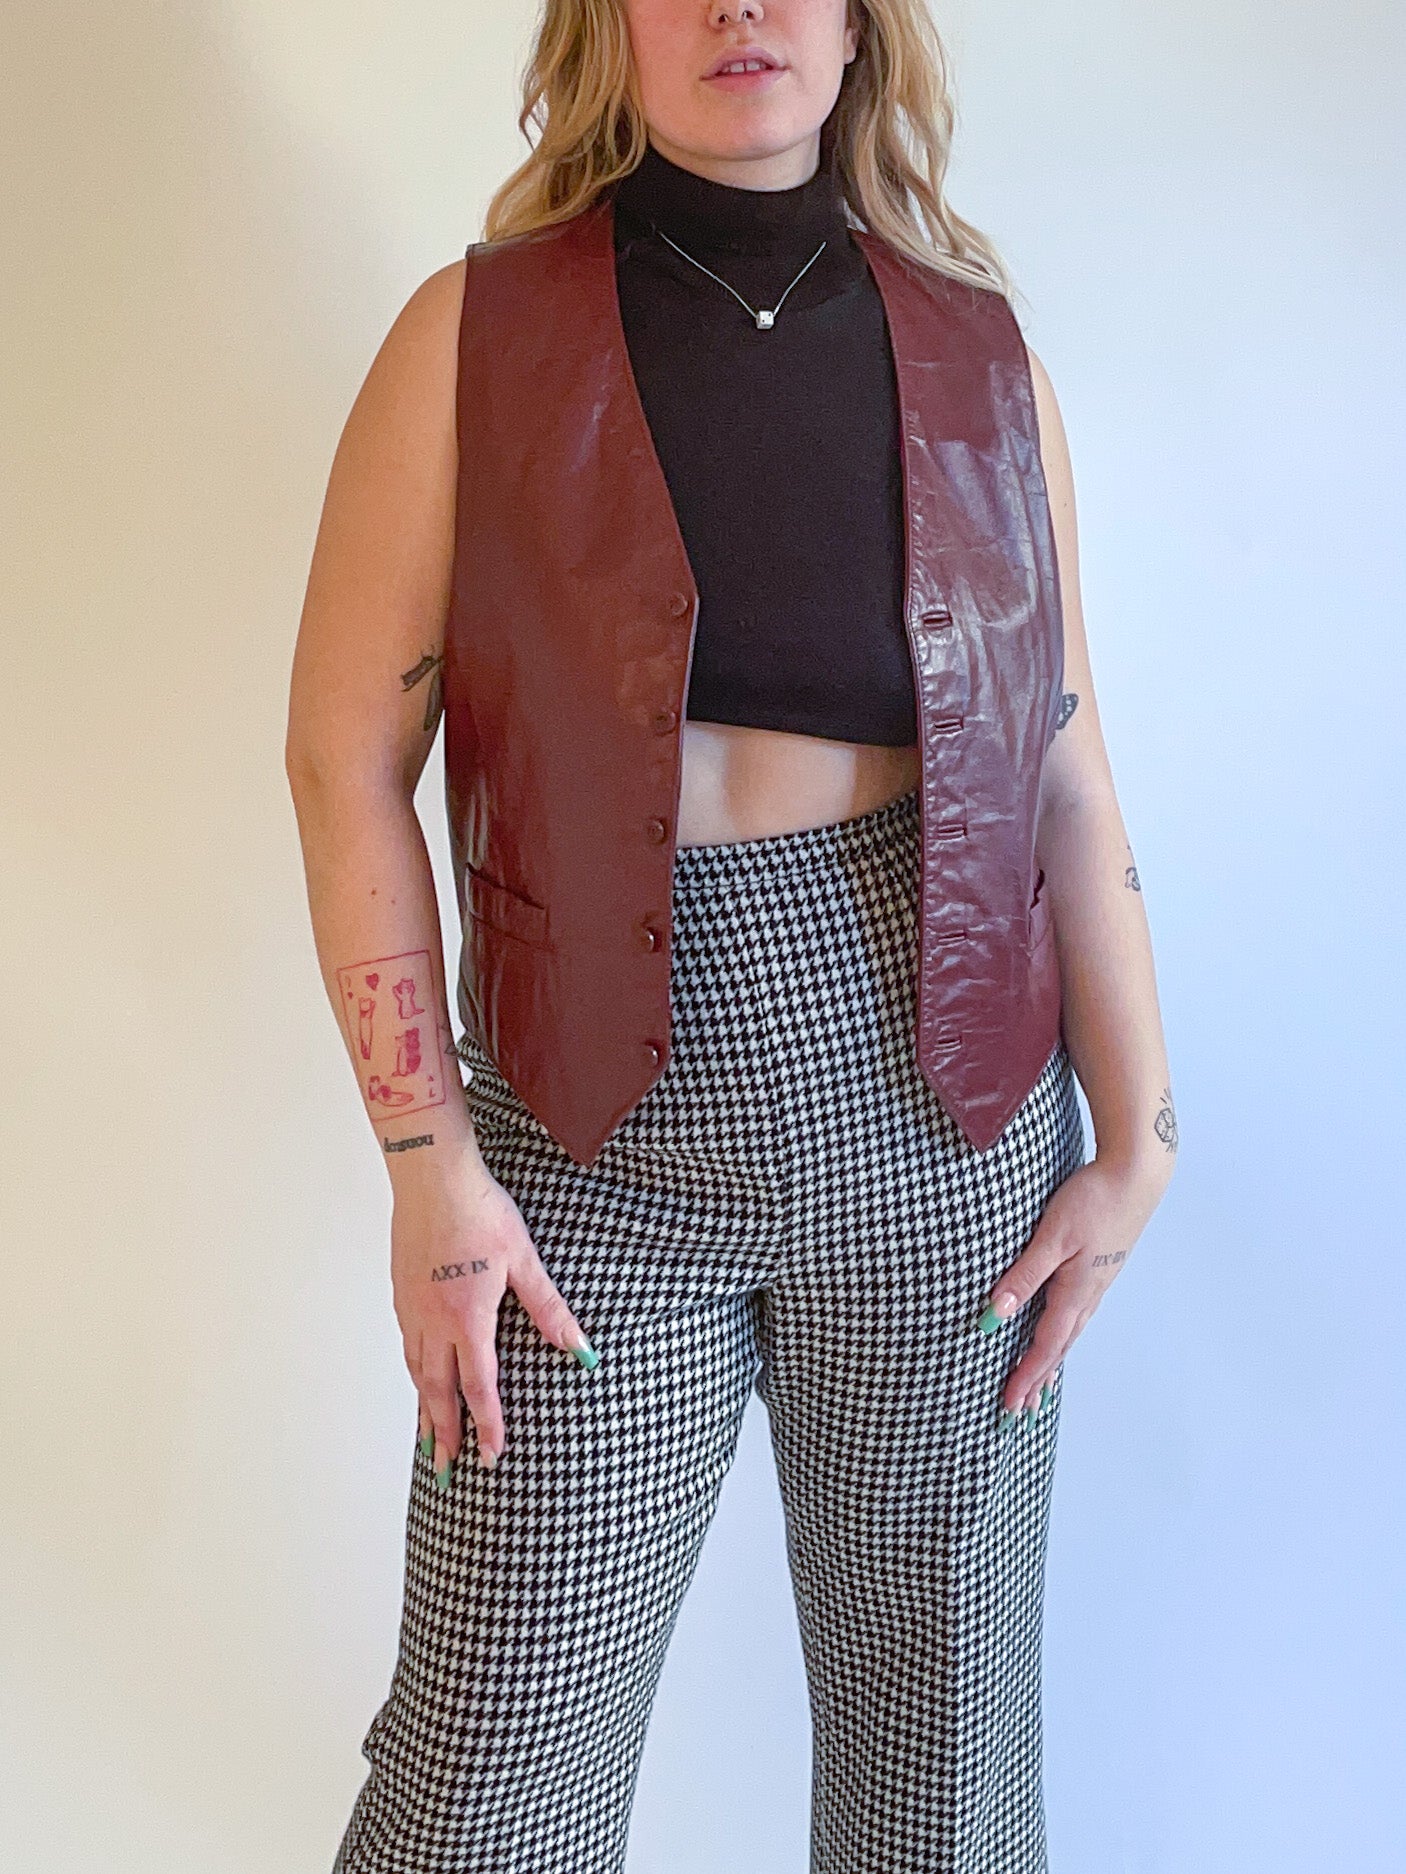 L 70s Oxblood Red Leather Vest